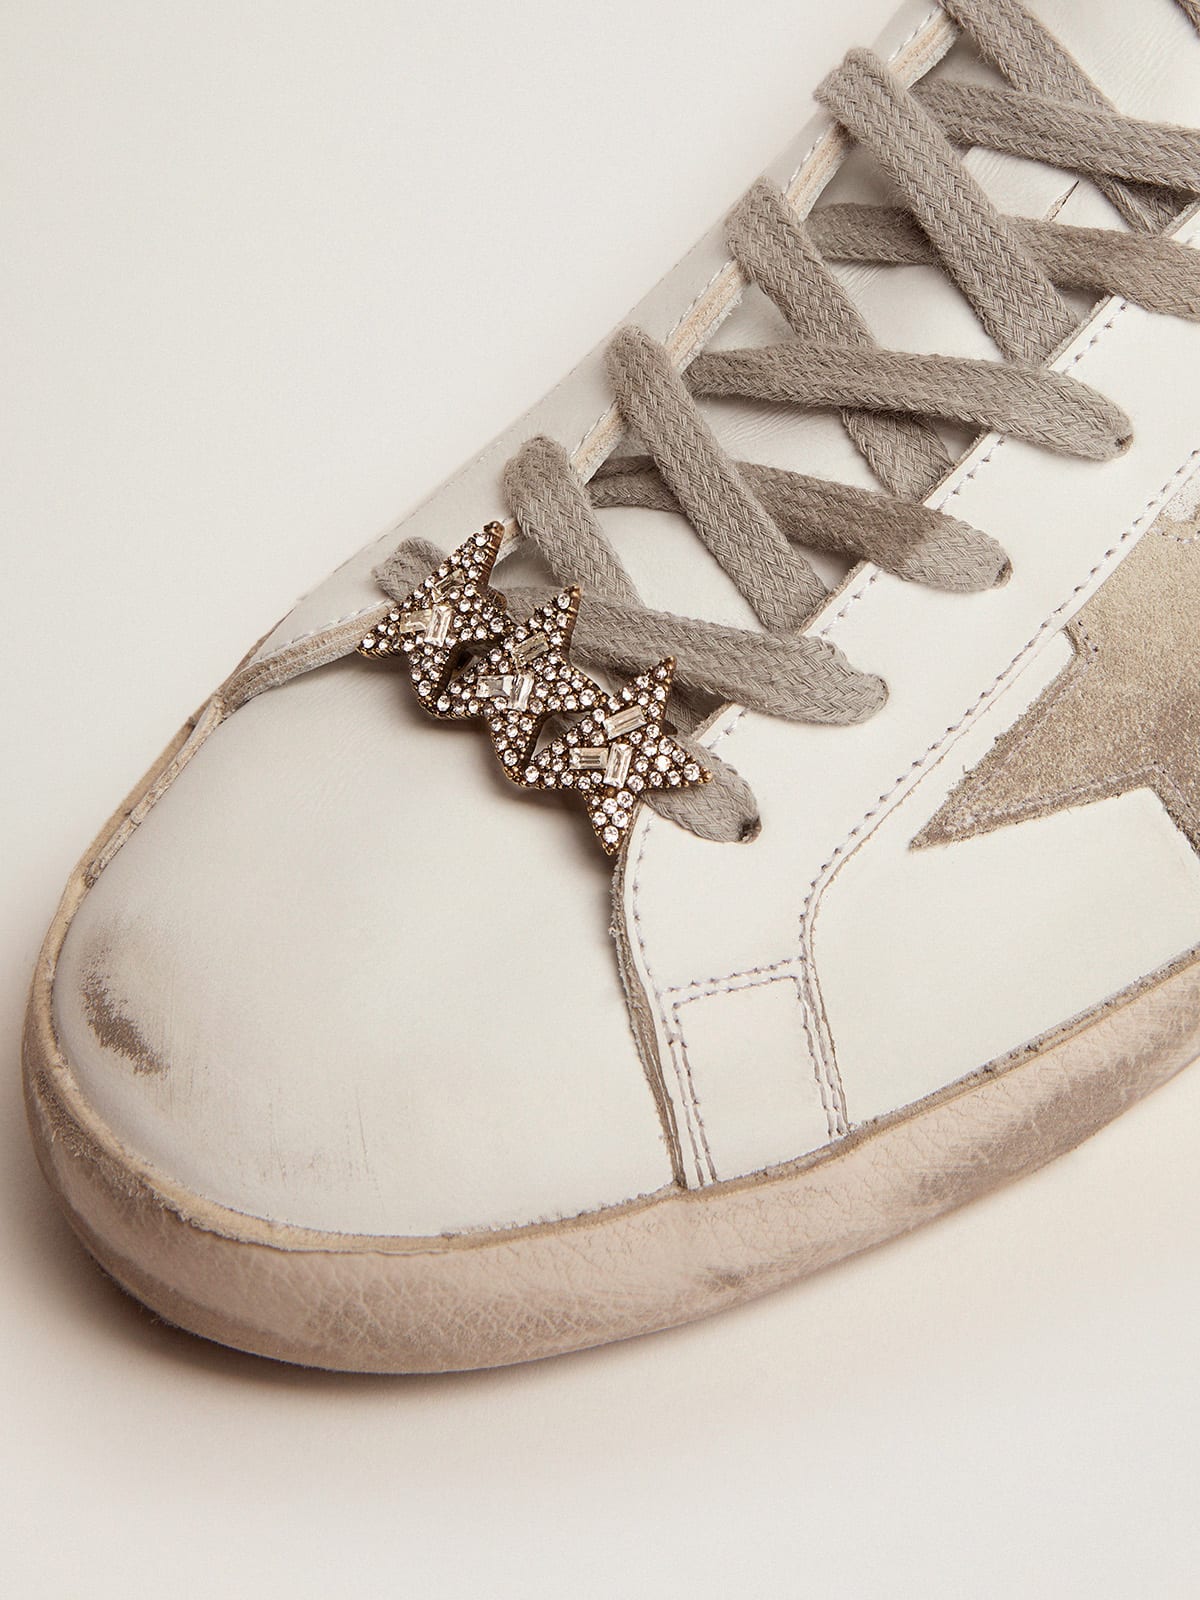 Golden Goose - Star Jewelmates Collection lace accessory with three stars in old gold color with decorative crystals in 